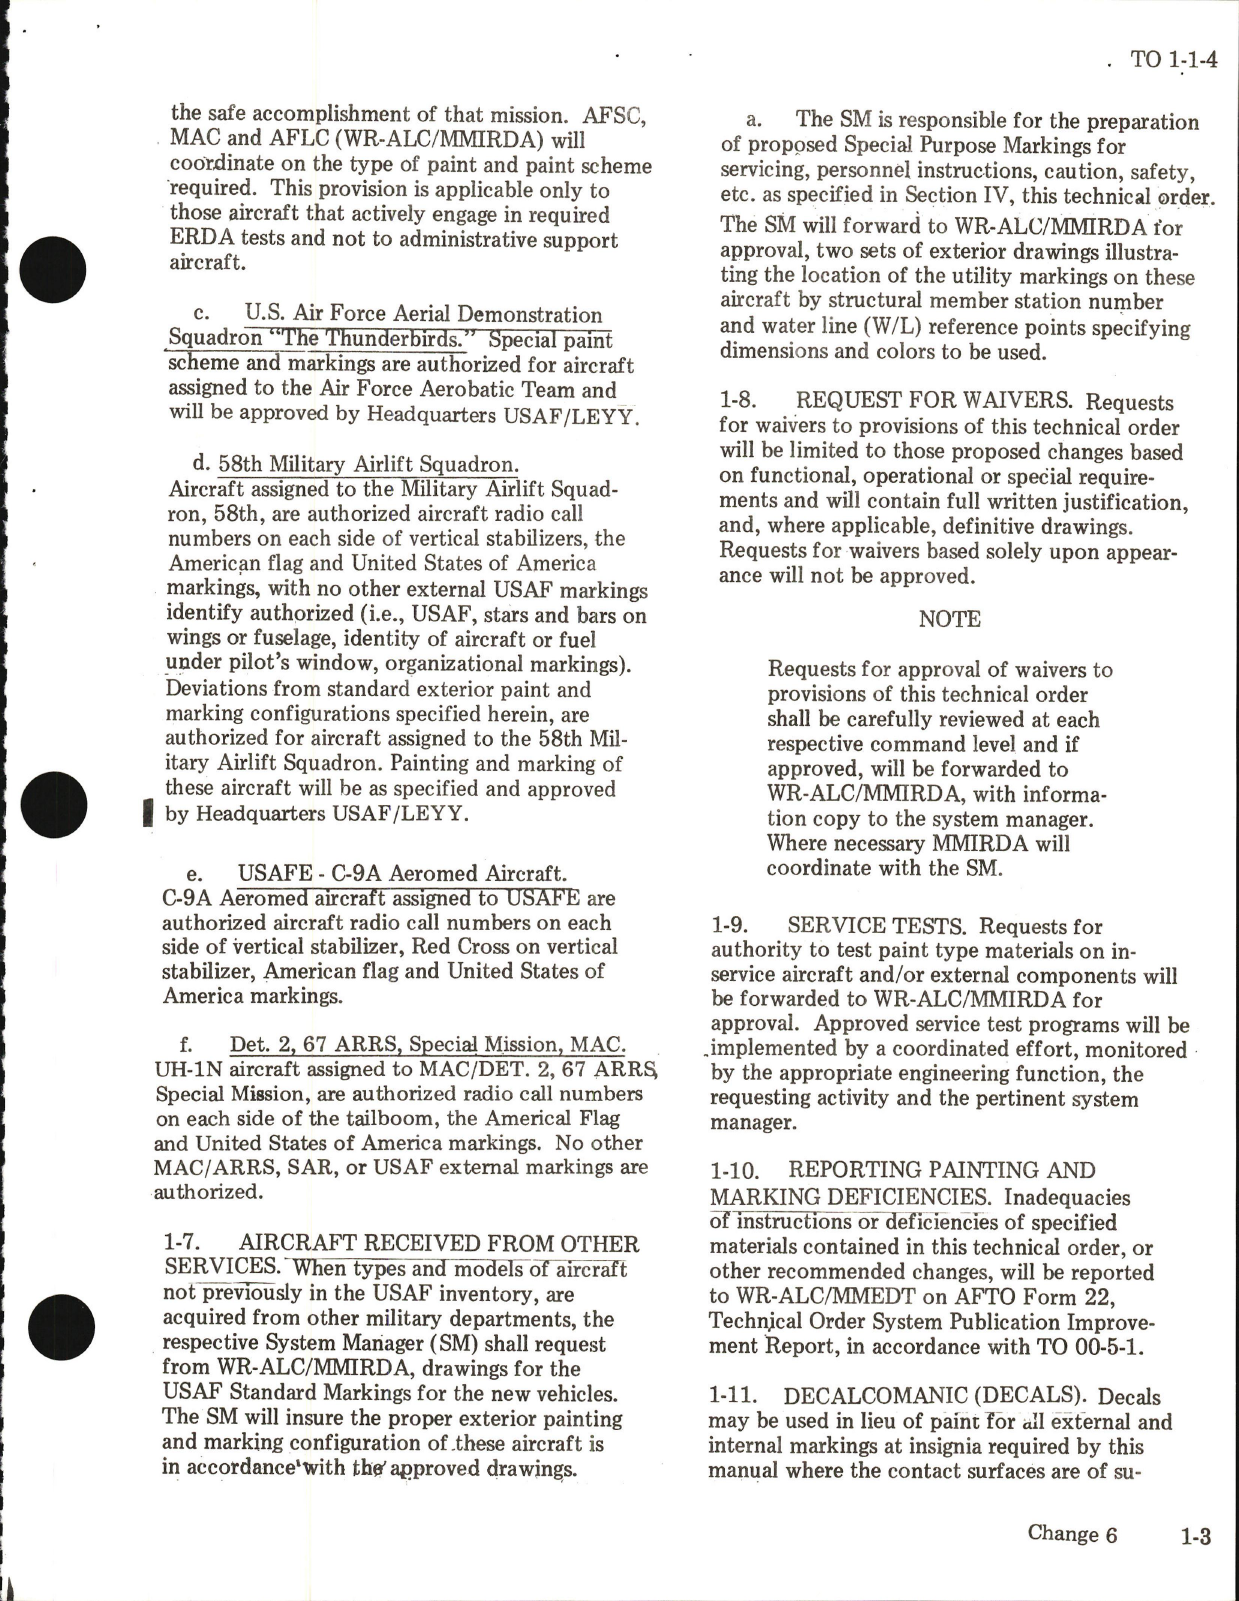 Sample page 5 from AirCorps Library document: Exterior Finishes, Insignia and Markings for USAF Aircraft - Change - 16